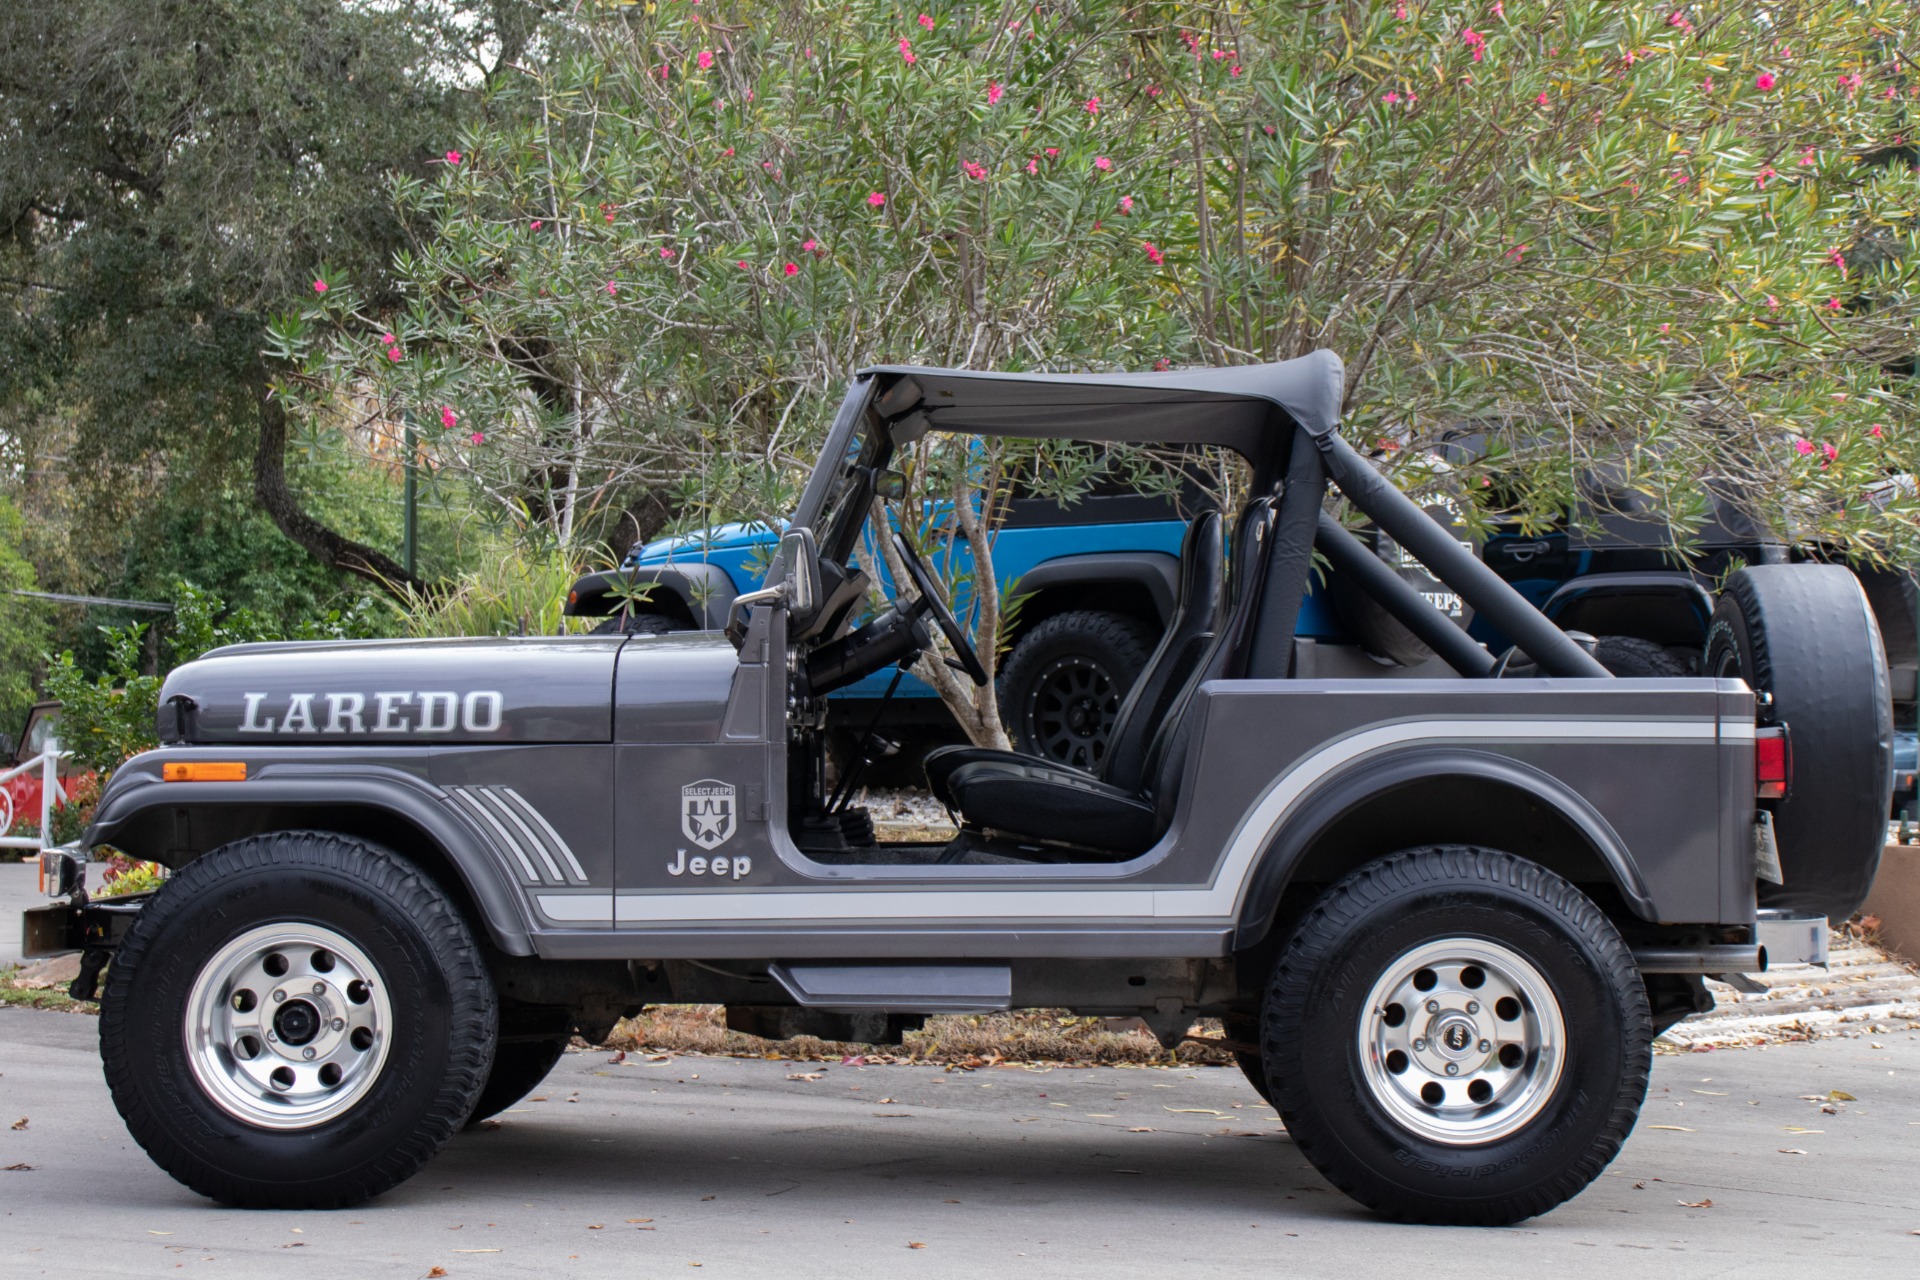 Used 1986 Jeep CJ-7 For Sale ($26,995) | Select Jeeps Inc. Stock #087522